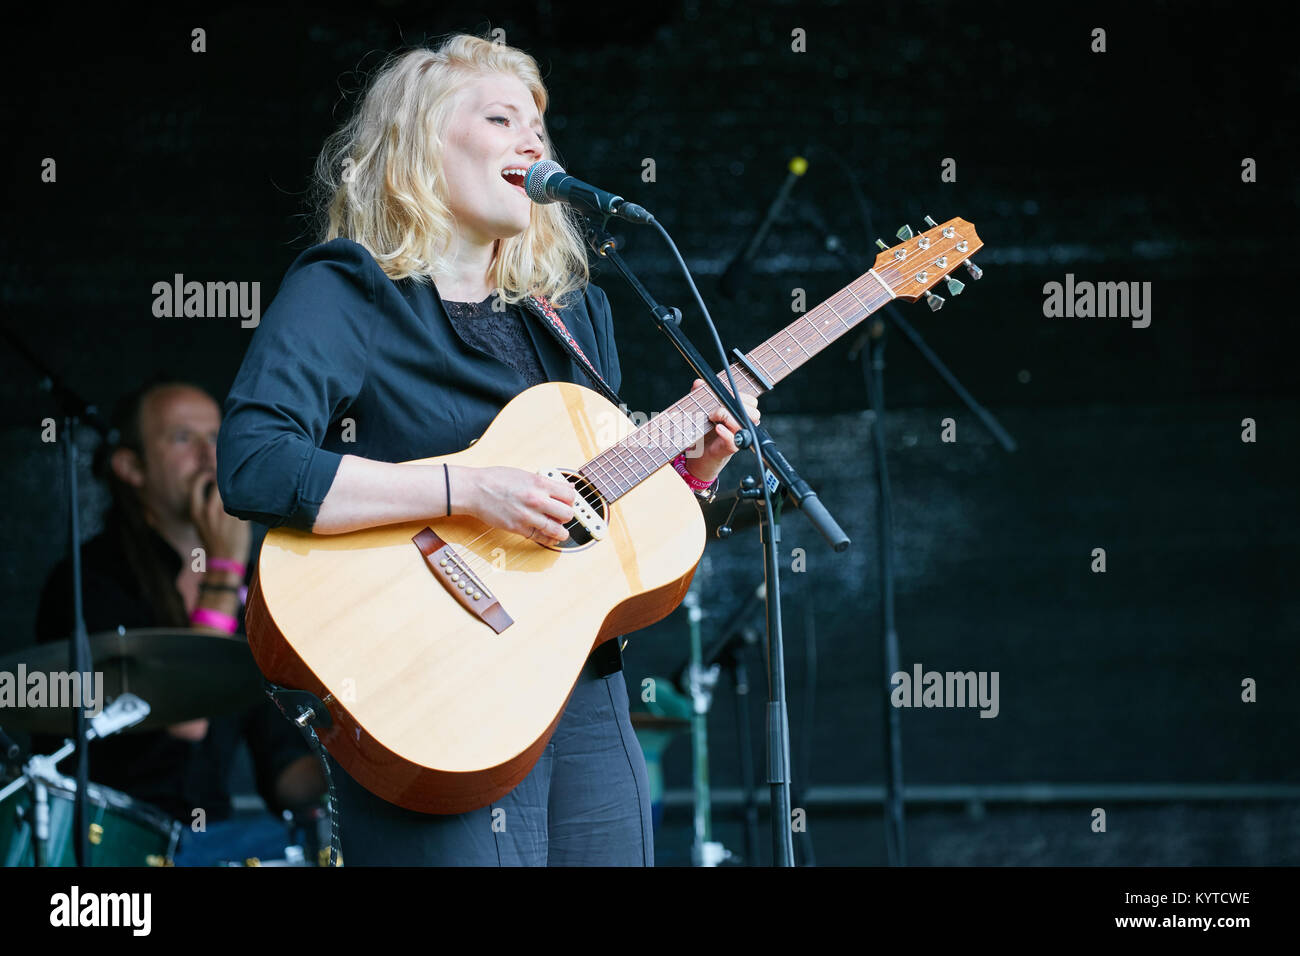 The Swedish folk duo Good Harvest Whitney performs a live concert during the Norwegian music festival Piknik i Parken in Oslo. The duo consists of the two musicians and singers Hanna Enlof and Ylva Eriksson (pictured). Norway, 22/06 2017. Stock Photo